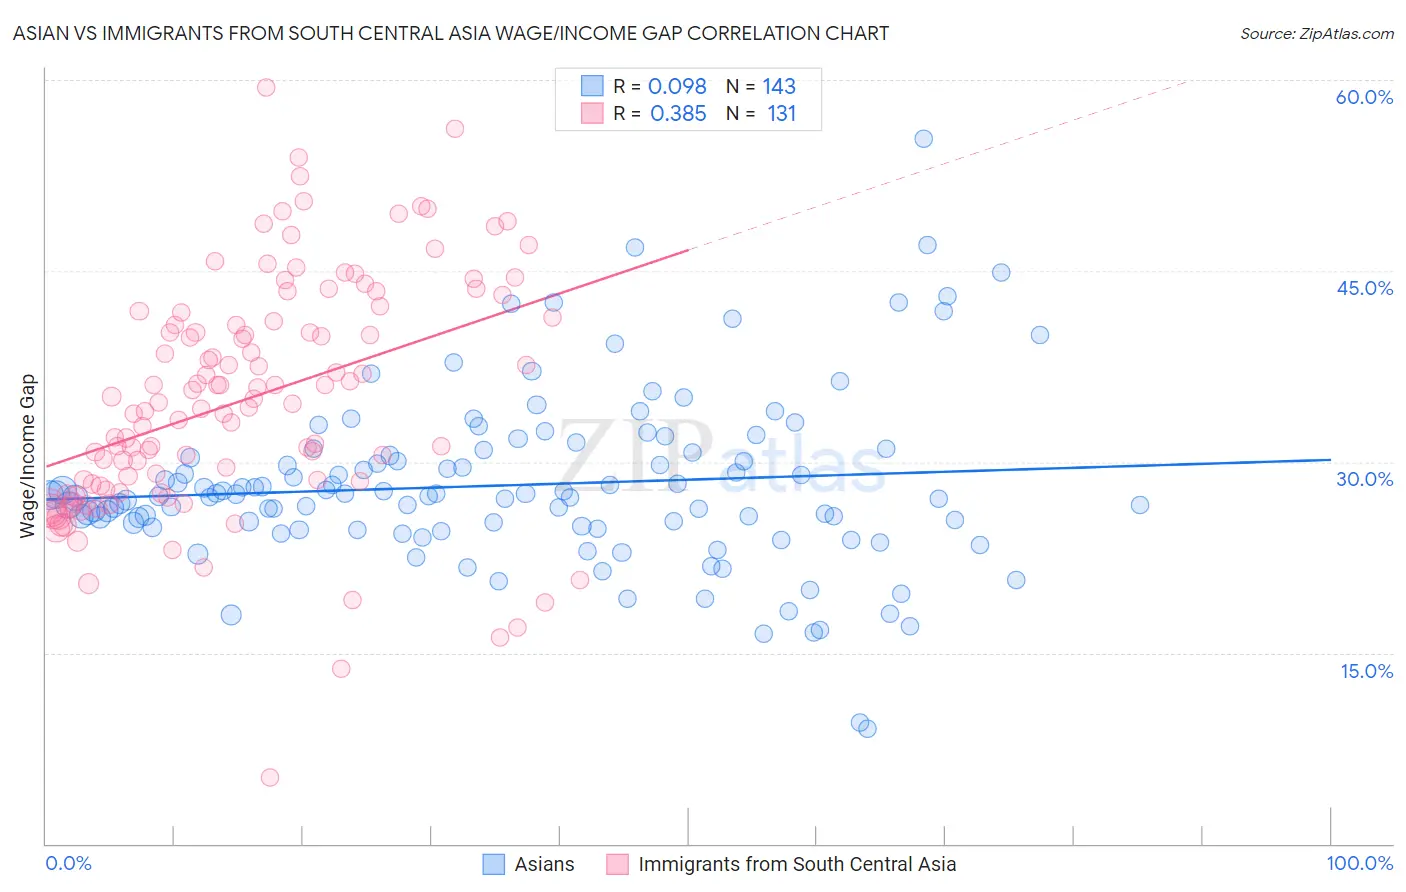 Asian vs Immigrants from South Central Asia Wage/Income Gap